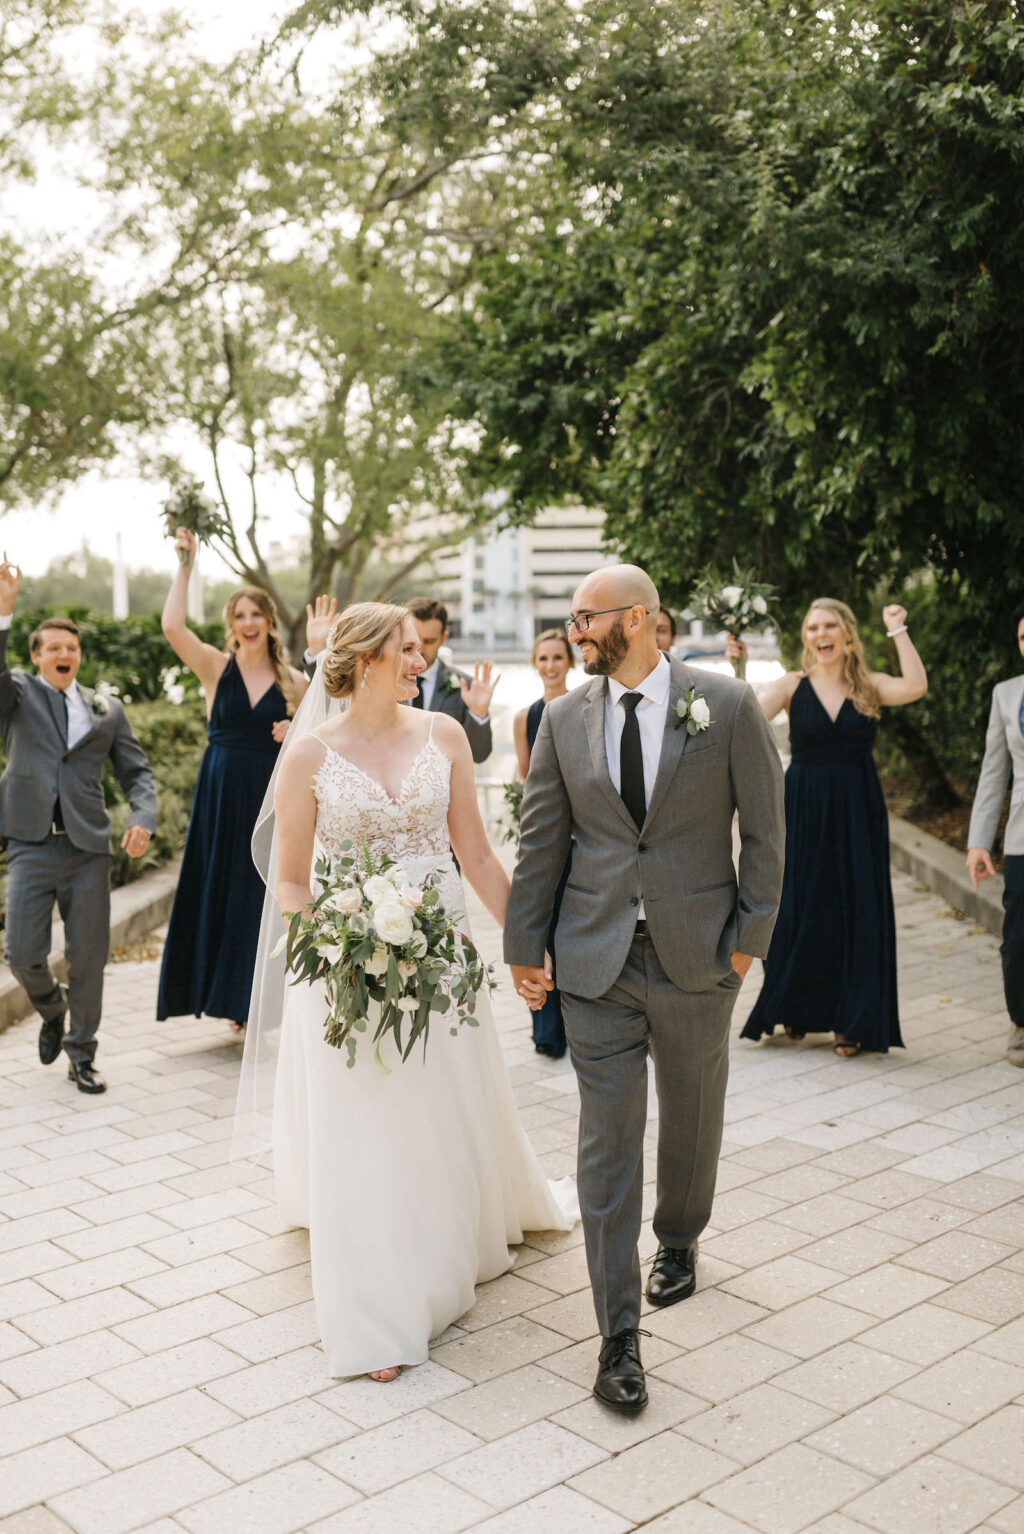 Bride and Groom Outdoor Wedding Party Portrait | Long Chiffon Navy Bridesmaid Dresses | Sheath Satin Charmeuse V Neck Lace Bodice Spaghetti Strap Bridal Gown | Groom and Groomsmen Wearing Classic Charcoal Grey Suit